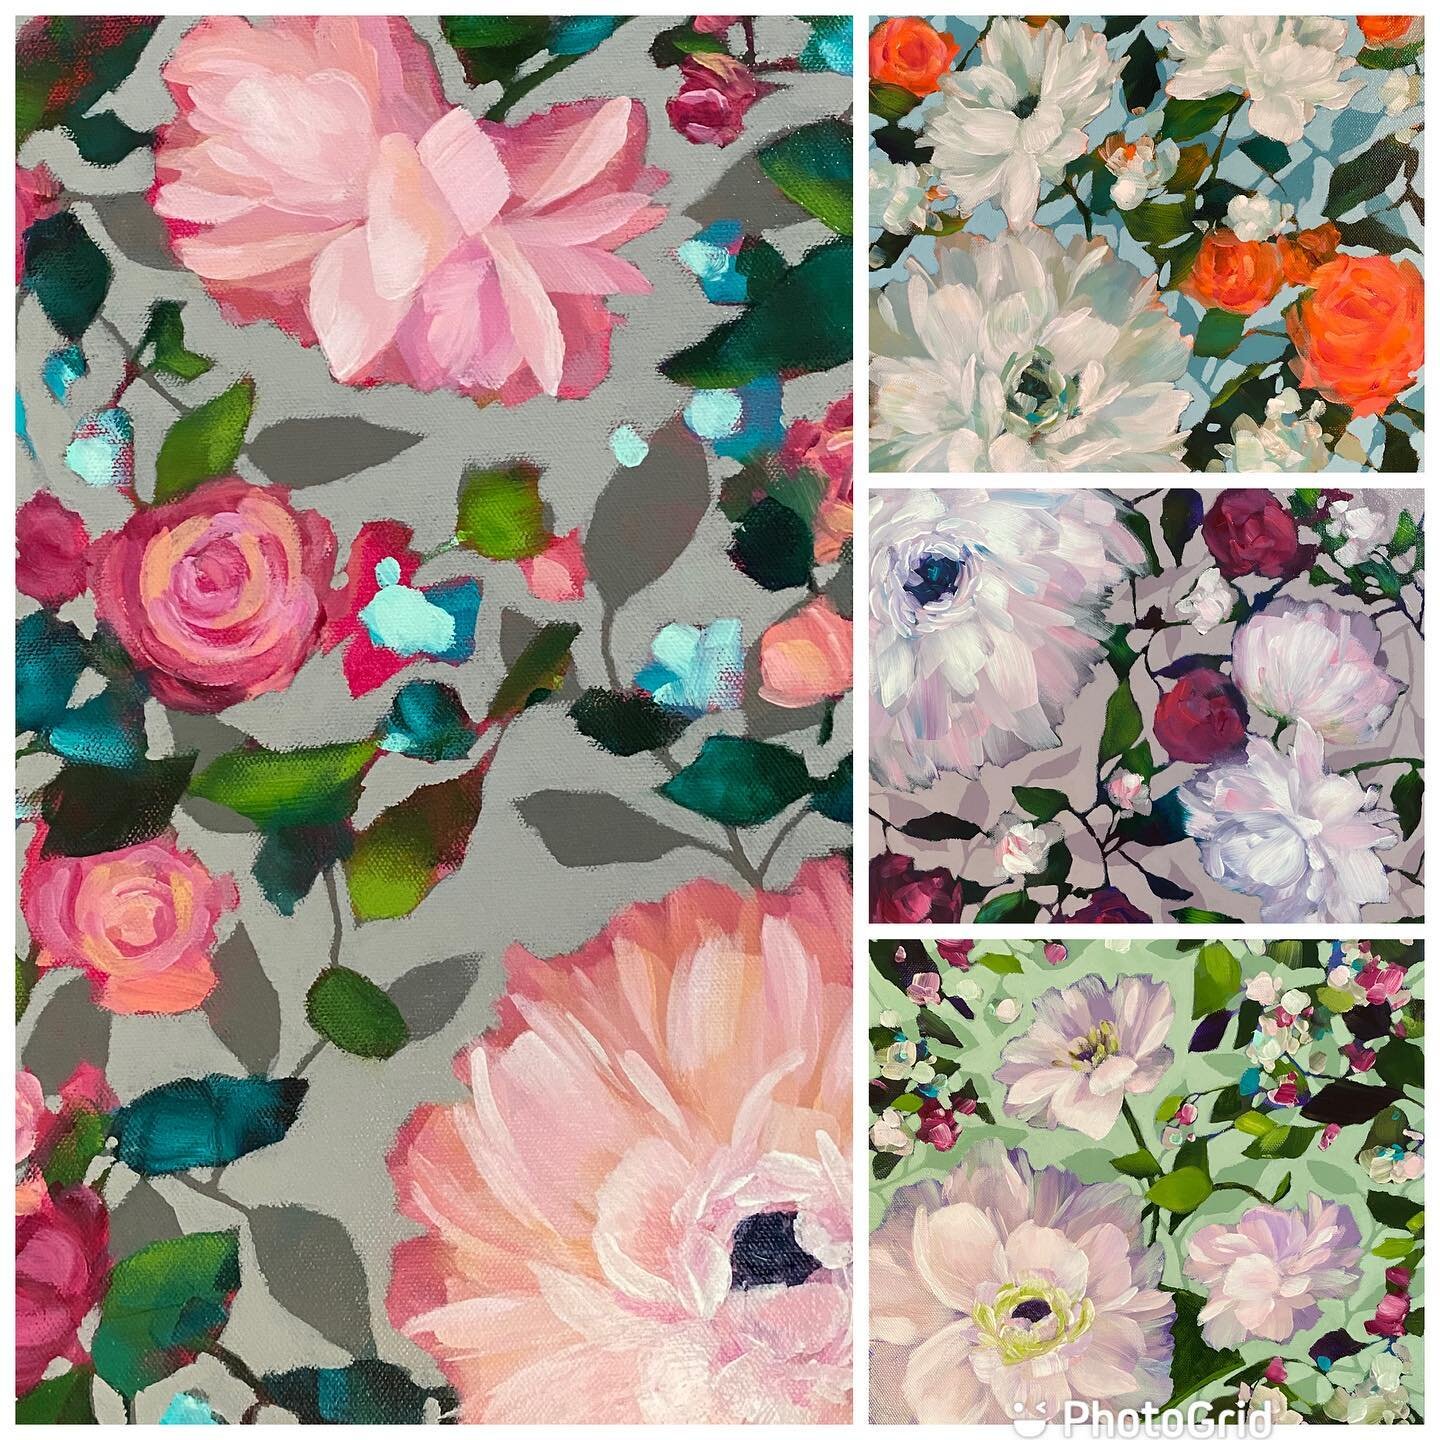 So happy to announce that my Tapestry Florals are now available at Woodlands Gallery (@art4yourwalls ) in Winnipeg, Manitoba!  Thank you to @thegallerygal for the opportunity to be a guest artist for your lovely gallery! 😊🌸

#tapestryflorals #flora